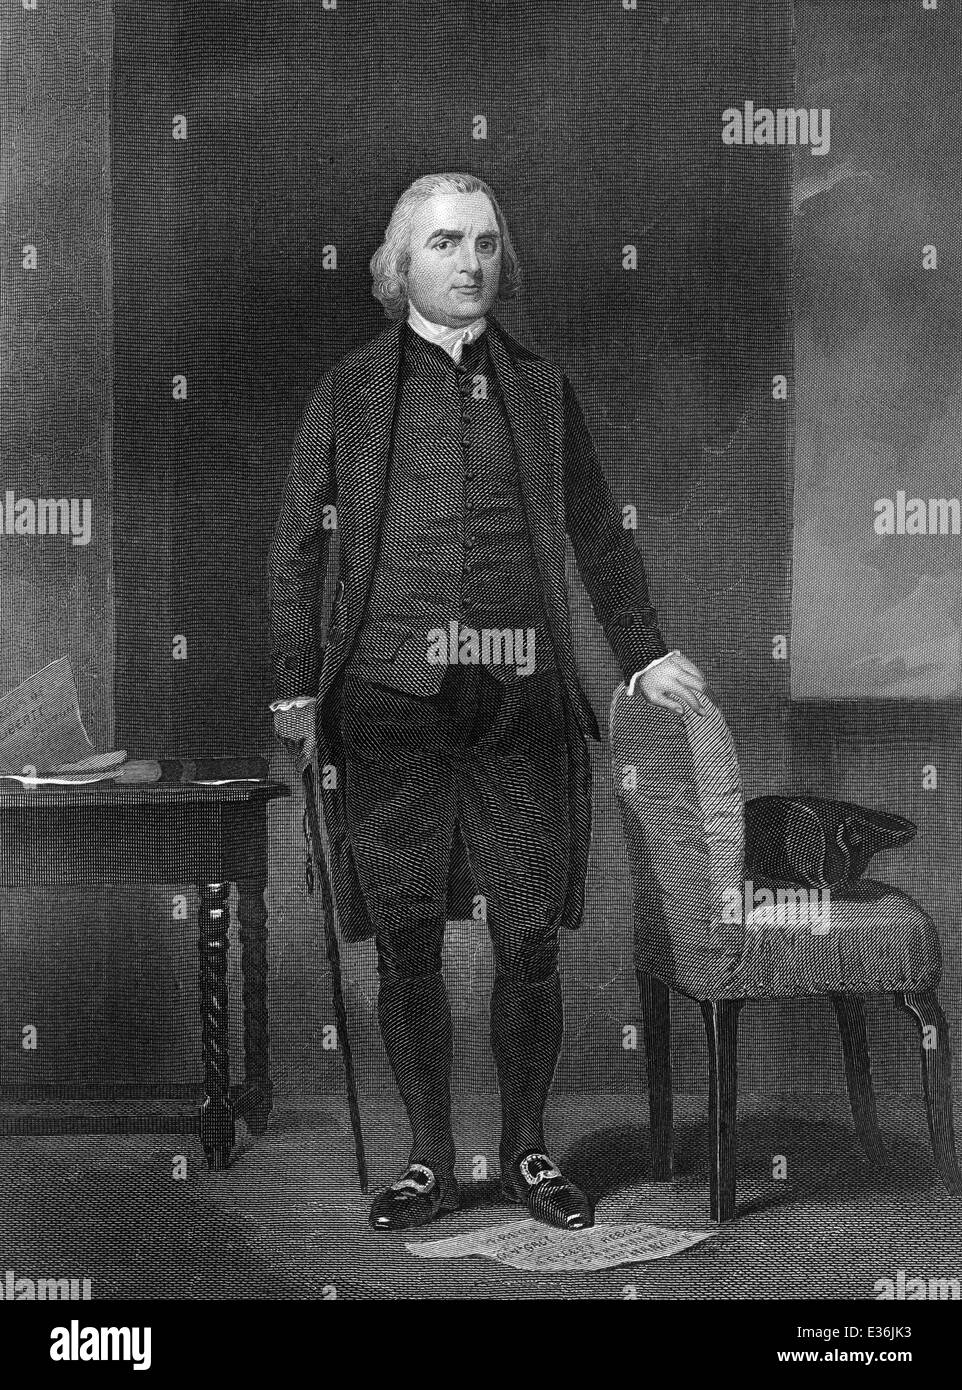 Samuel Adams, 1722 - 1803, an American patriot and opponent of British policy in Massachusetts before the American Revolution Stock Photo